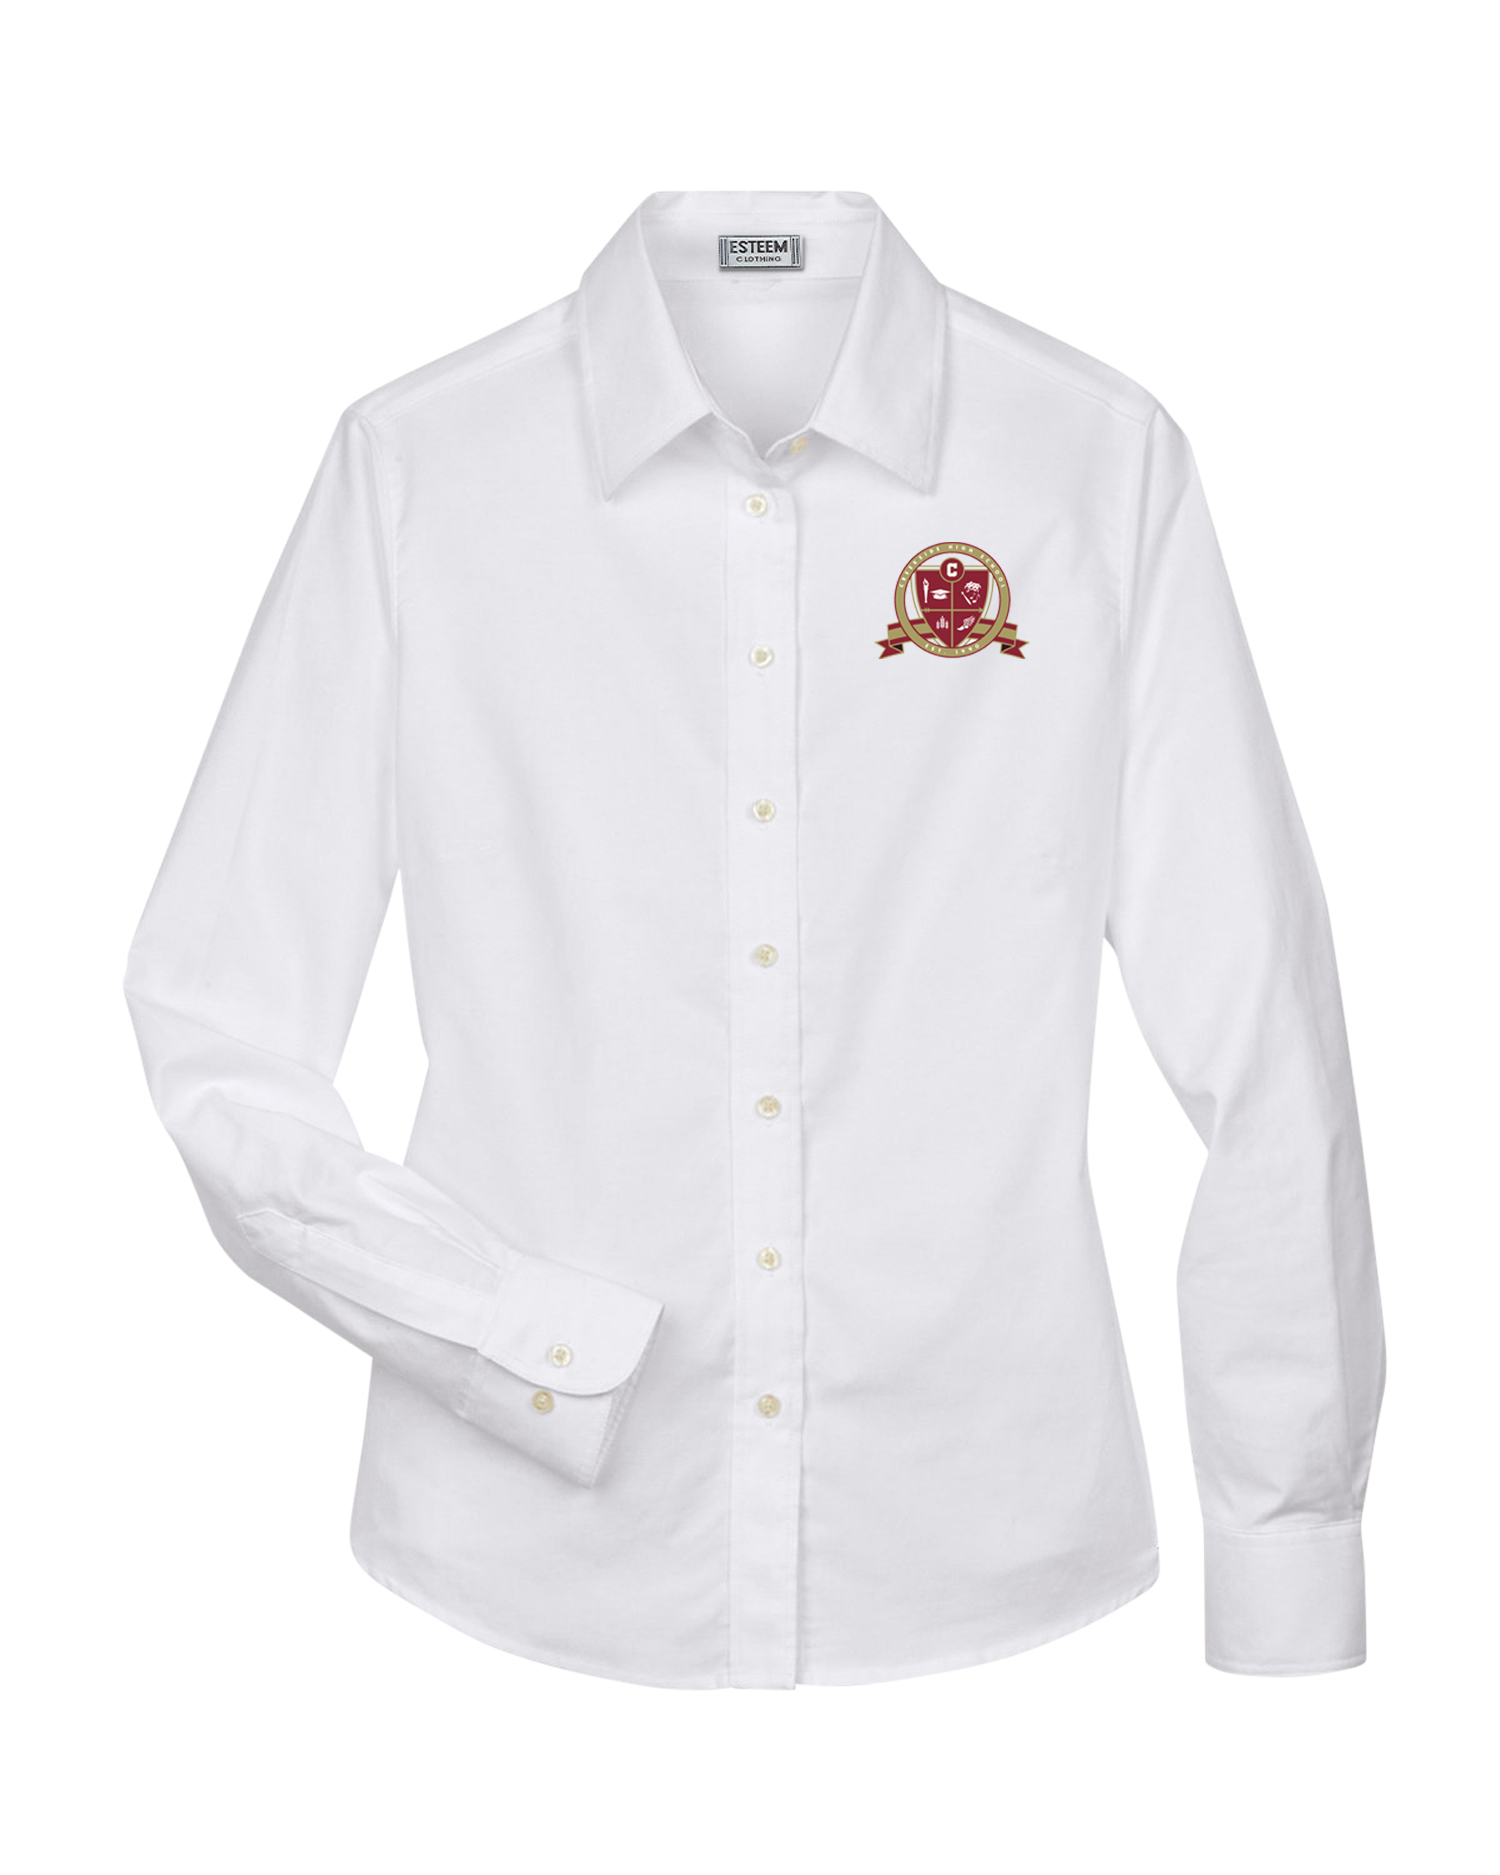 CR - 60% Cotton & 40% Polyester Ladies L/S Oxford shirt - 66333